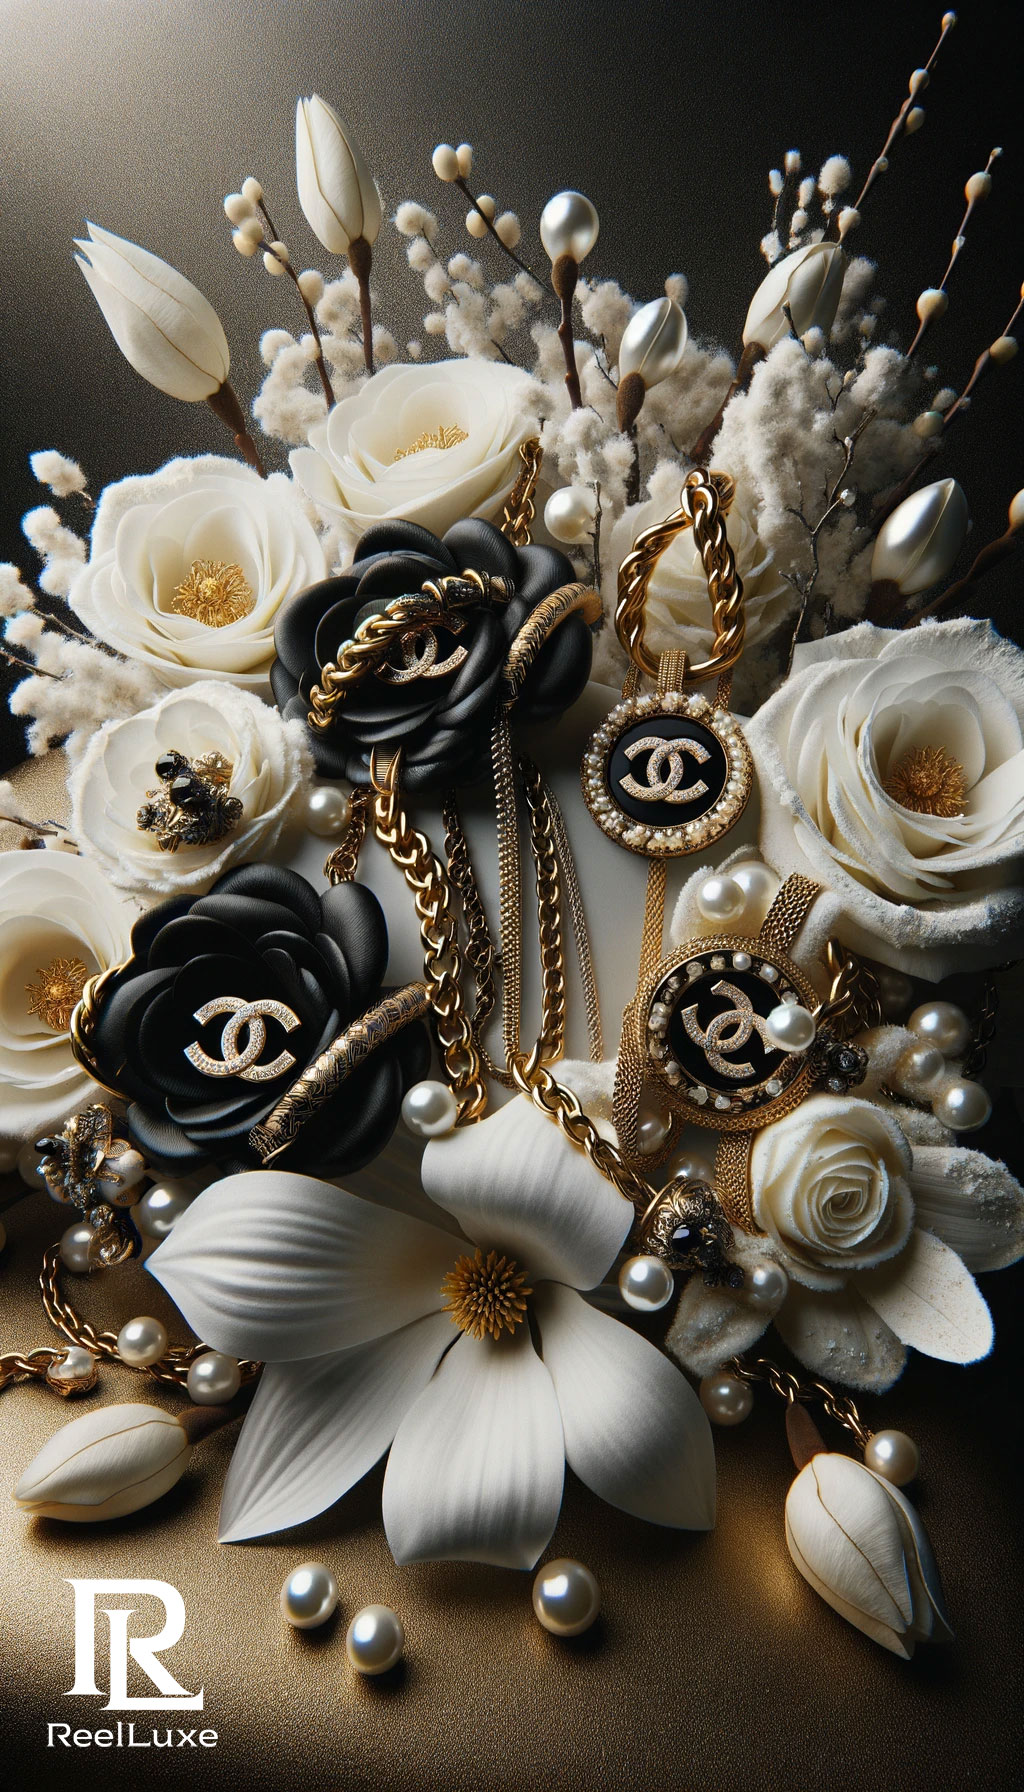 Romance in the Air: Stylish Valentine's Day Gift Ideas - Chanel